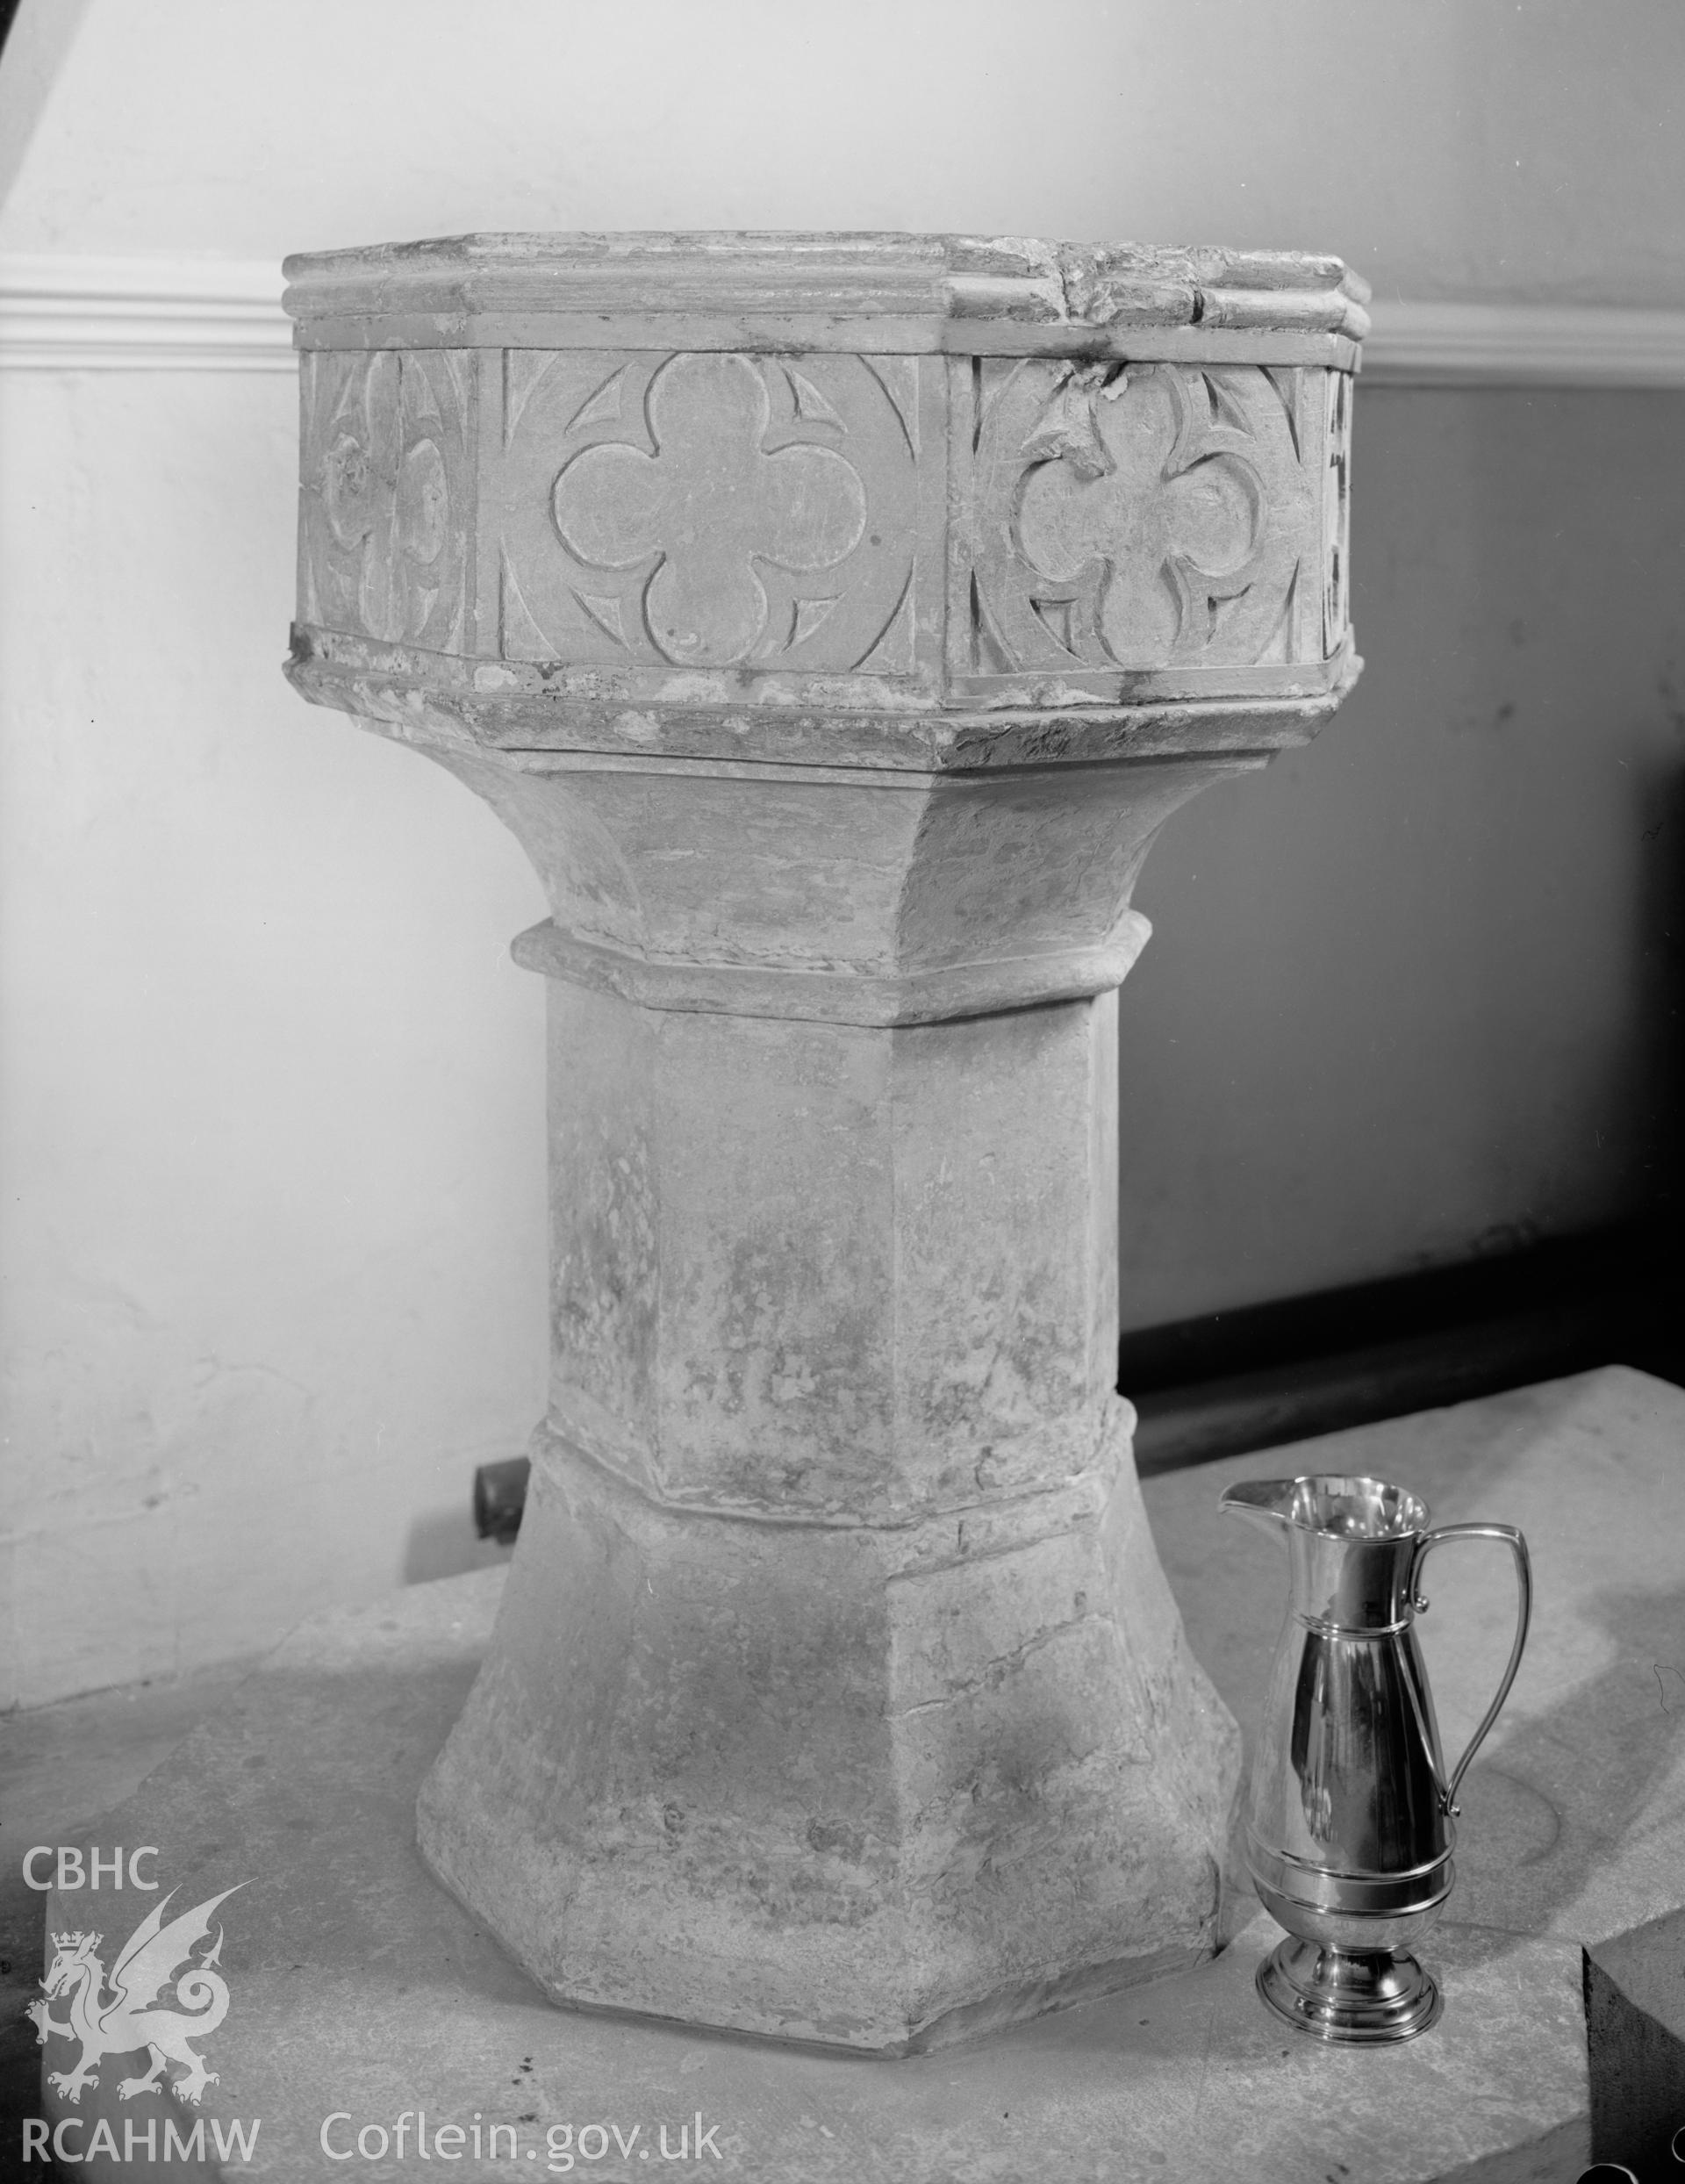 Interior view of St George's Church showing font and jug, St Georges taken 25.06.65.